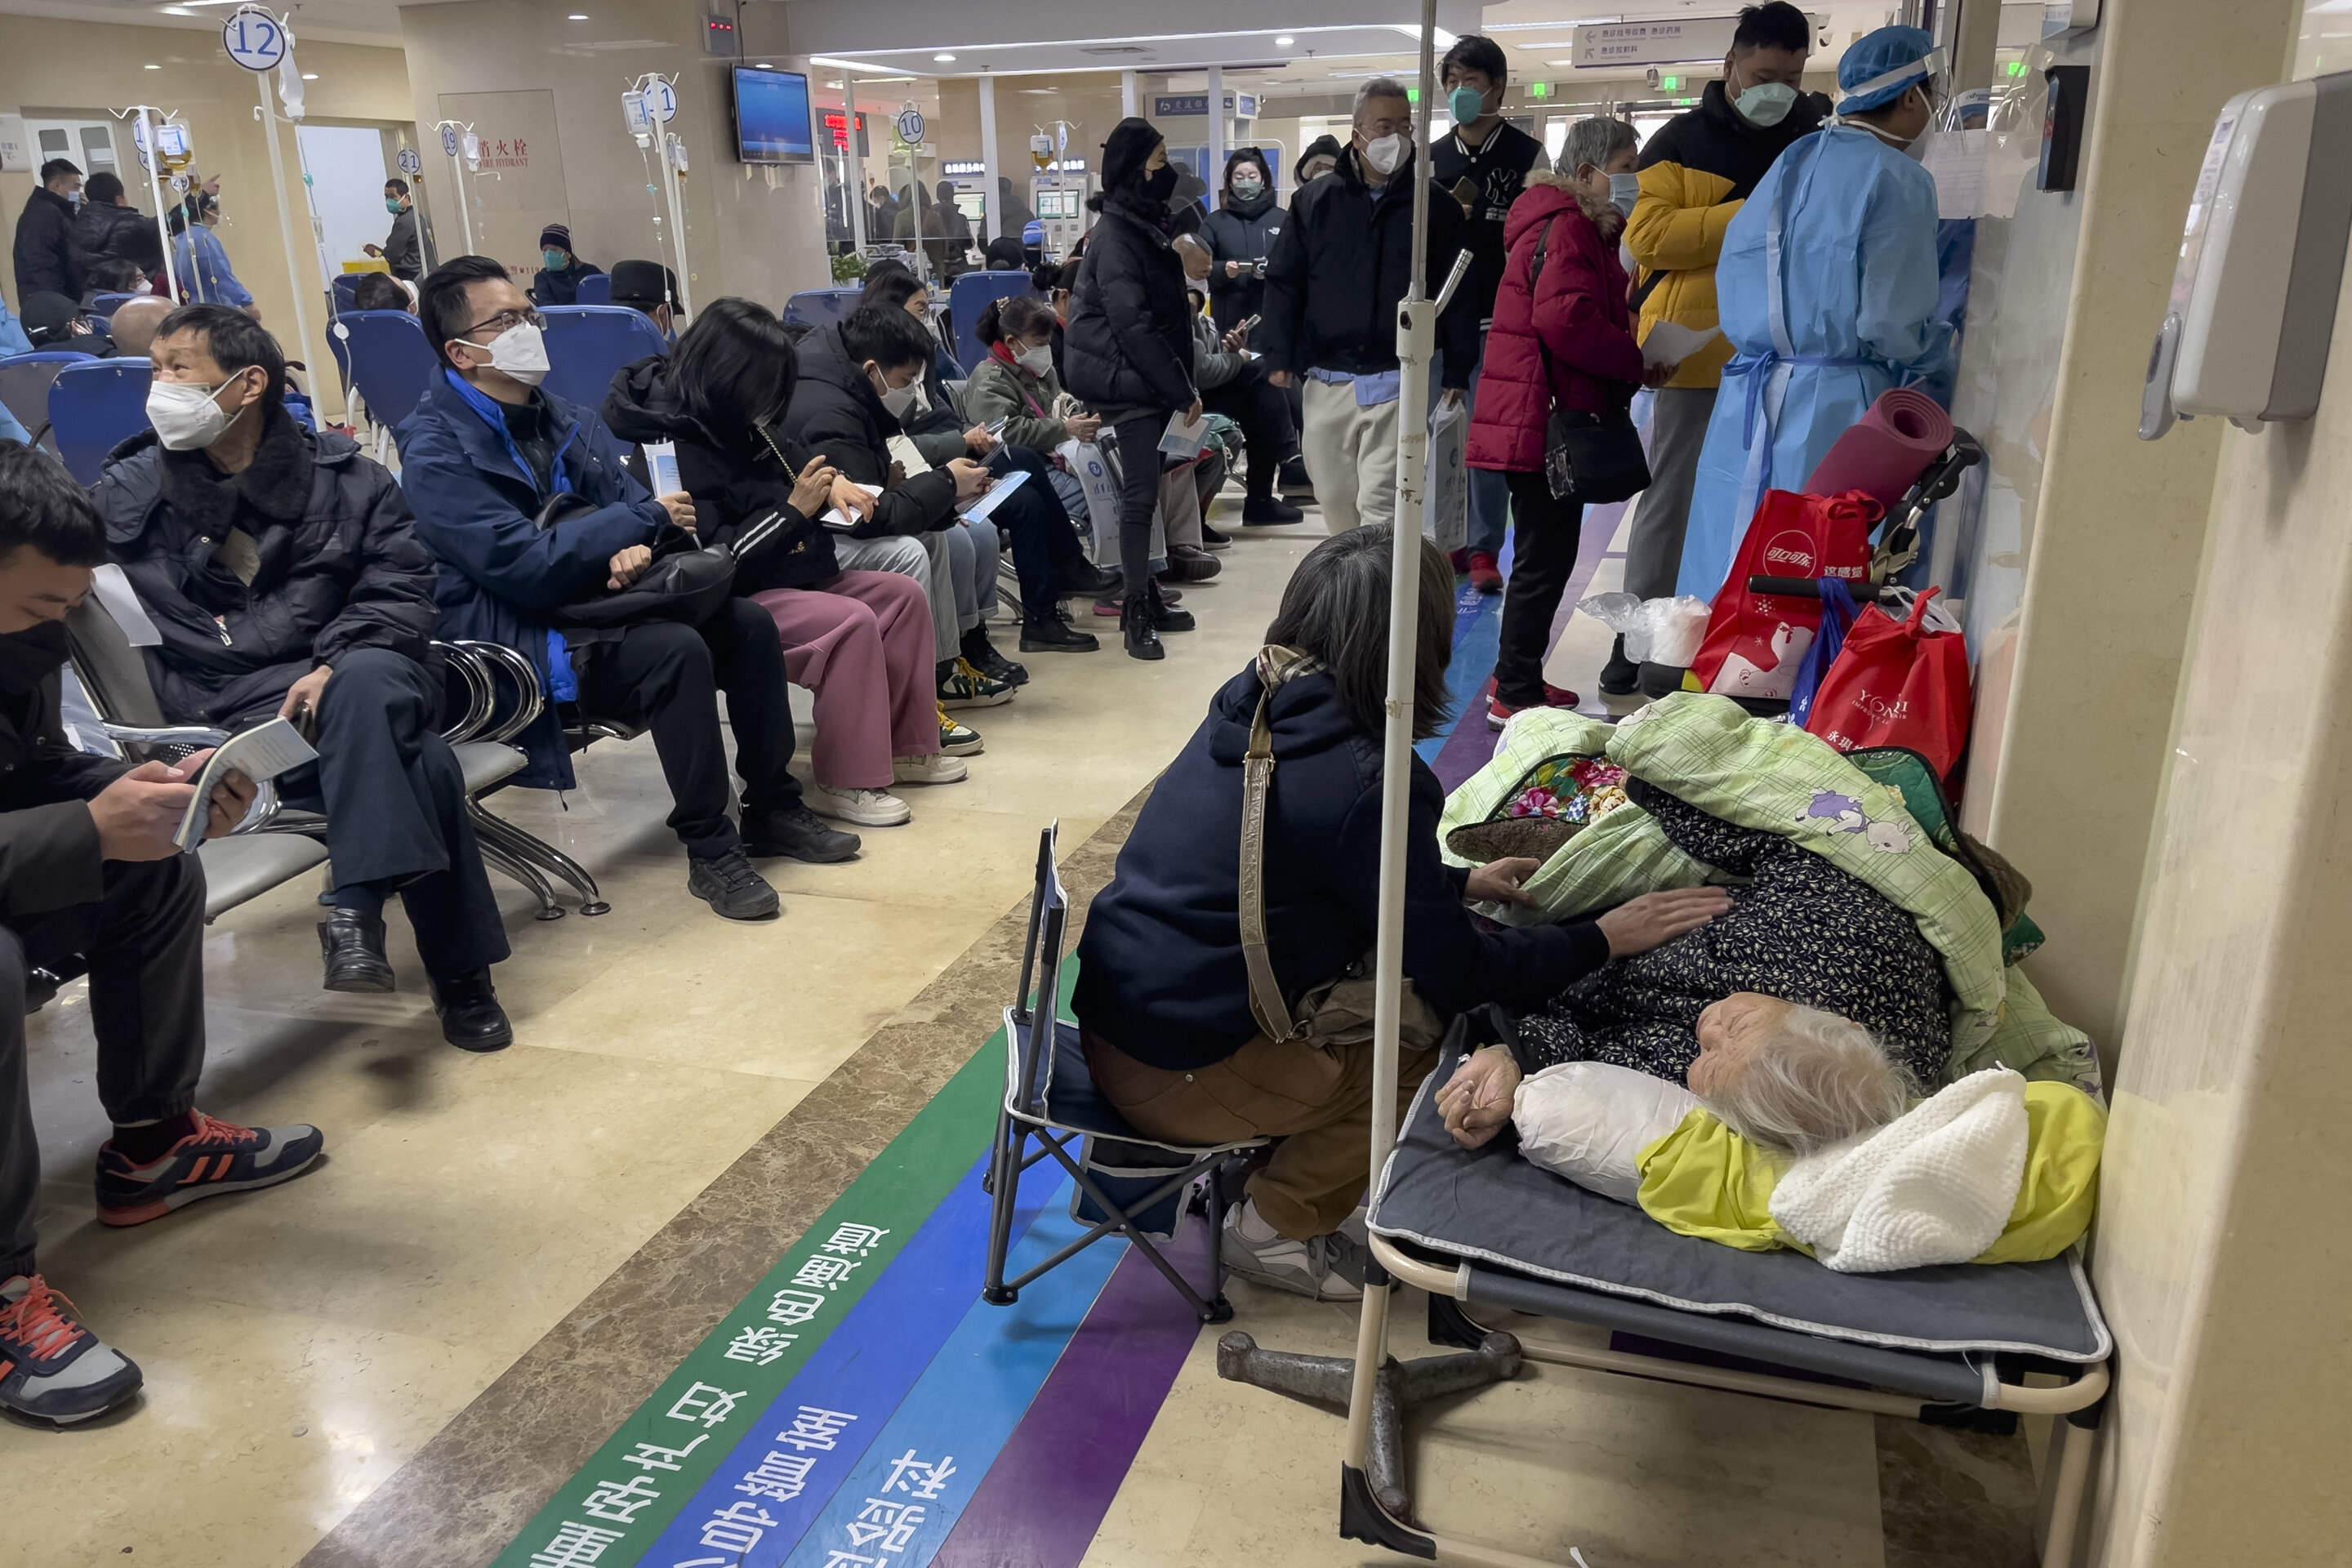 #Beds run out at Beijing hospital as COVID brings more sick